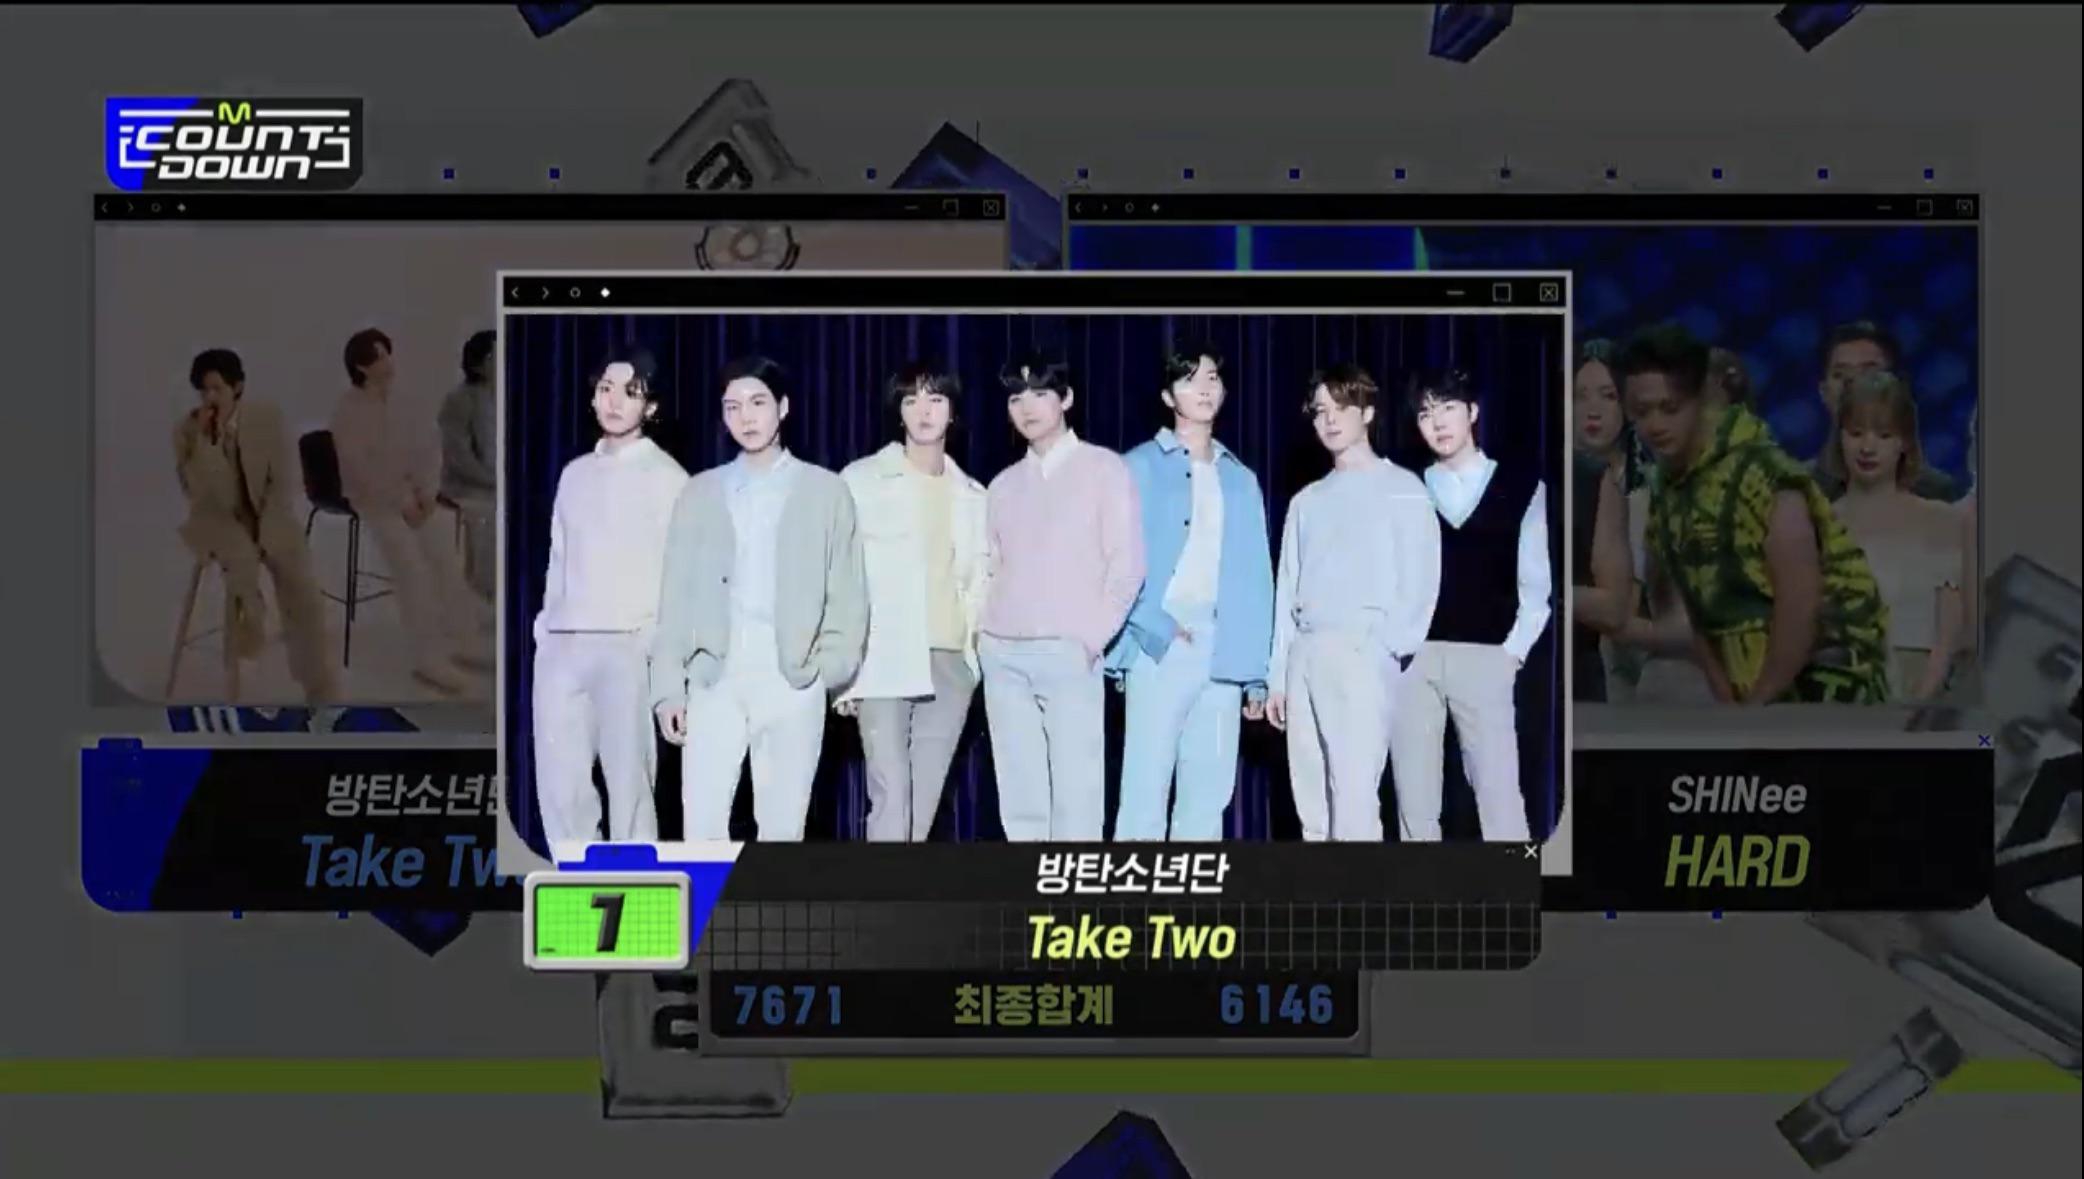 230706 BTS have taken their third win for “Take Two” on this week’s M COUNTDOWN